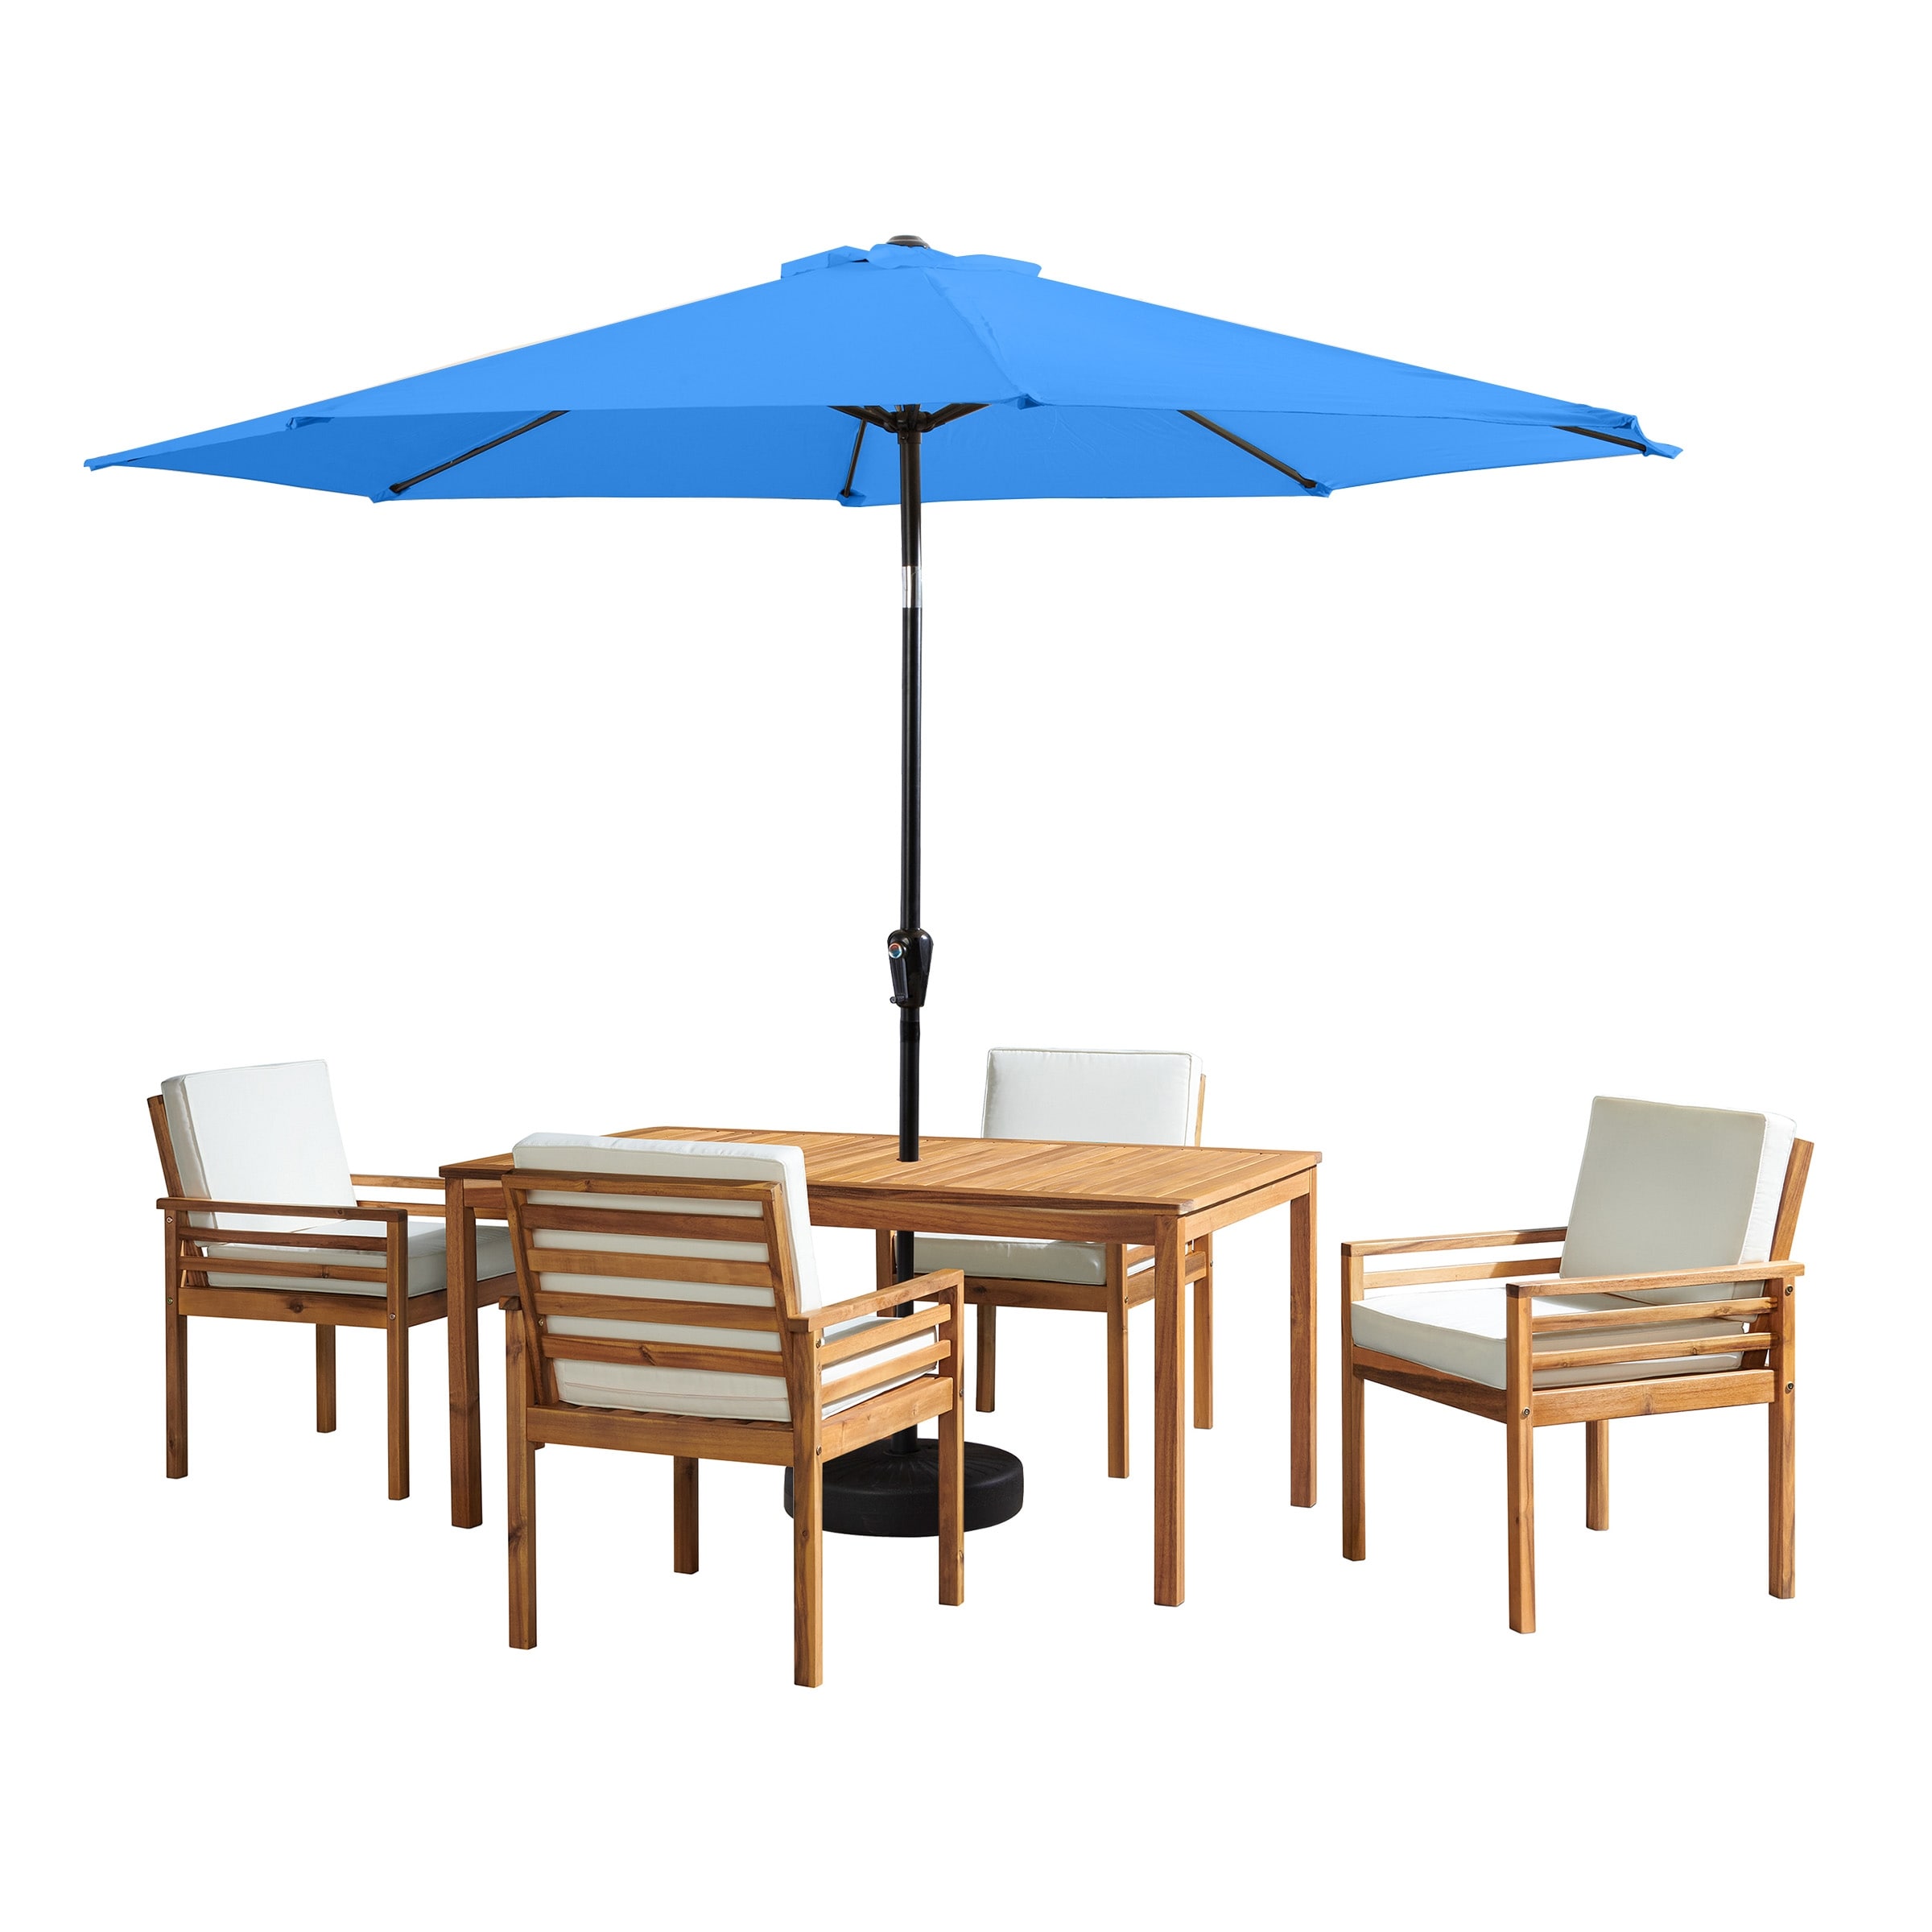 Okemo Table With 4 Chairs And 10-foot Auto Tilt Umbrella - 6 Piece Set - N/a